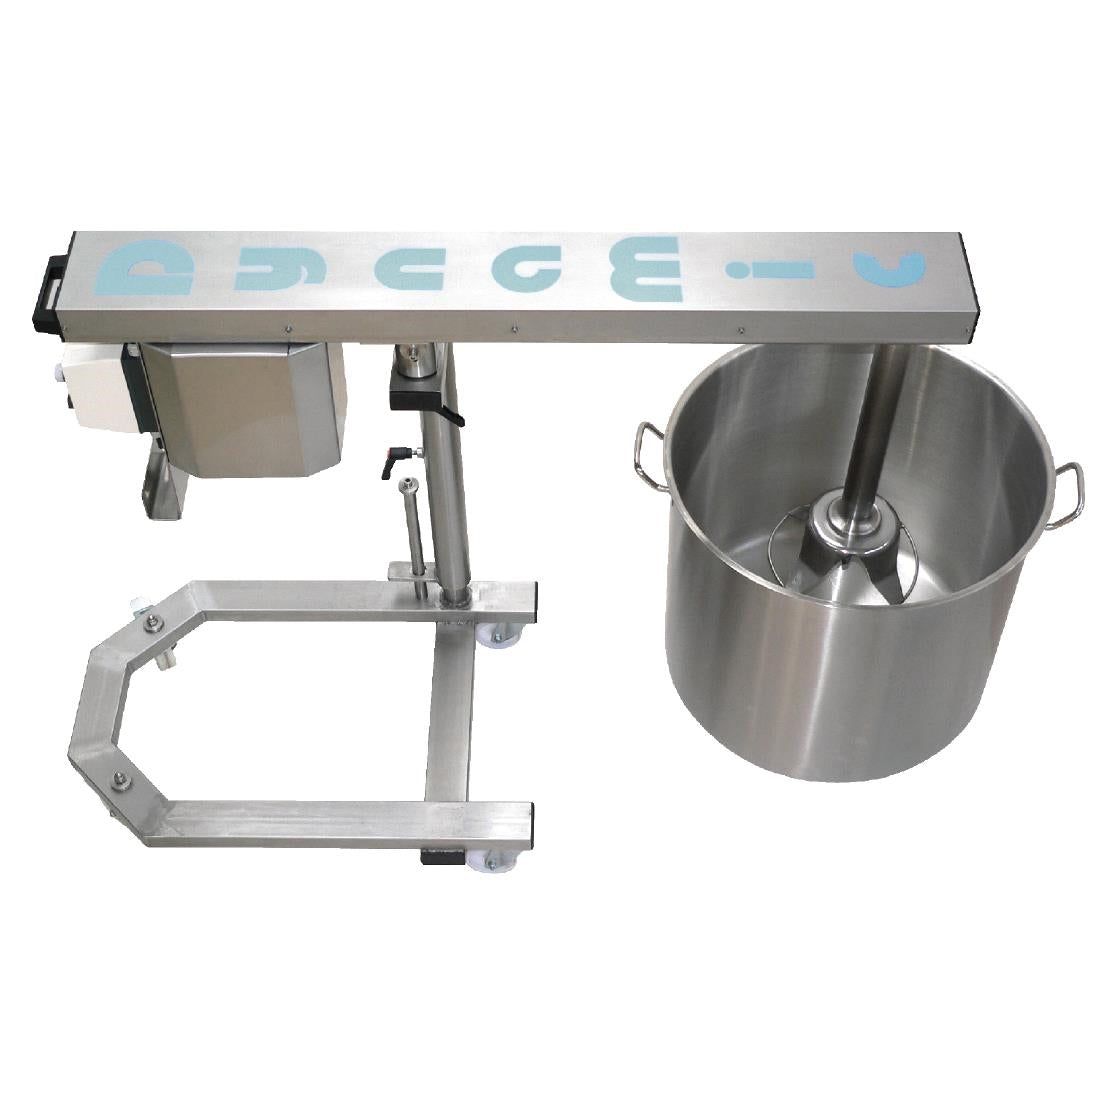 DN669 Dynamic Gigamix Mixer Variable Speed TB002 JD Catering Equipment Solutions Ltd